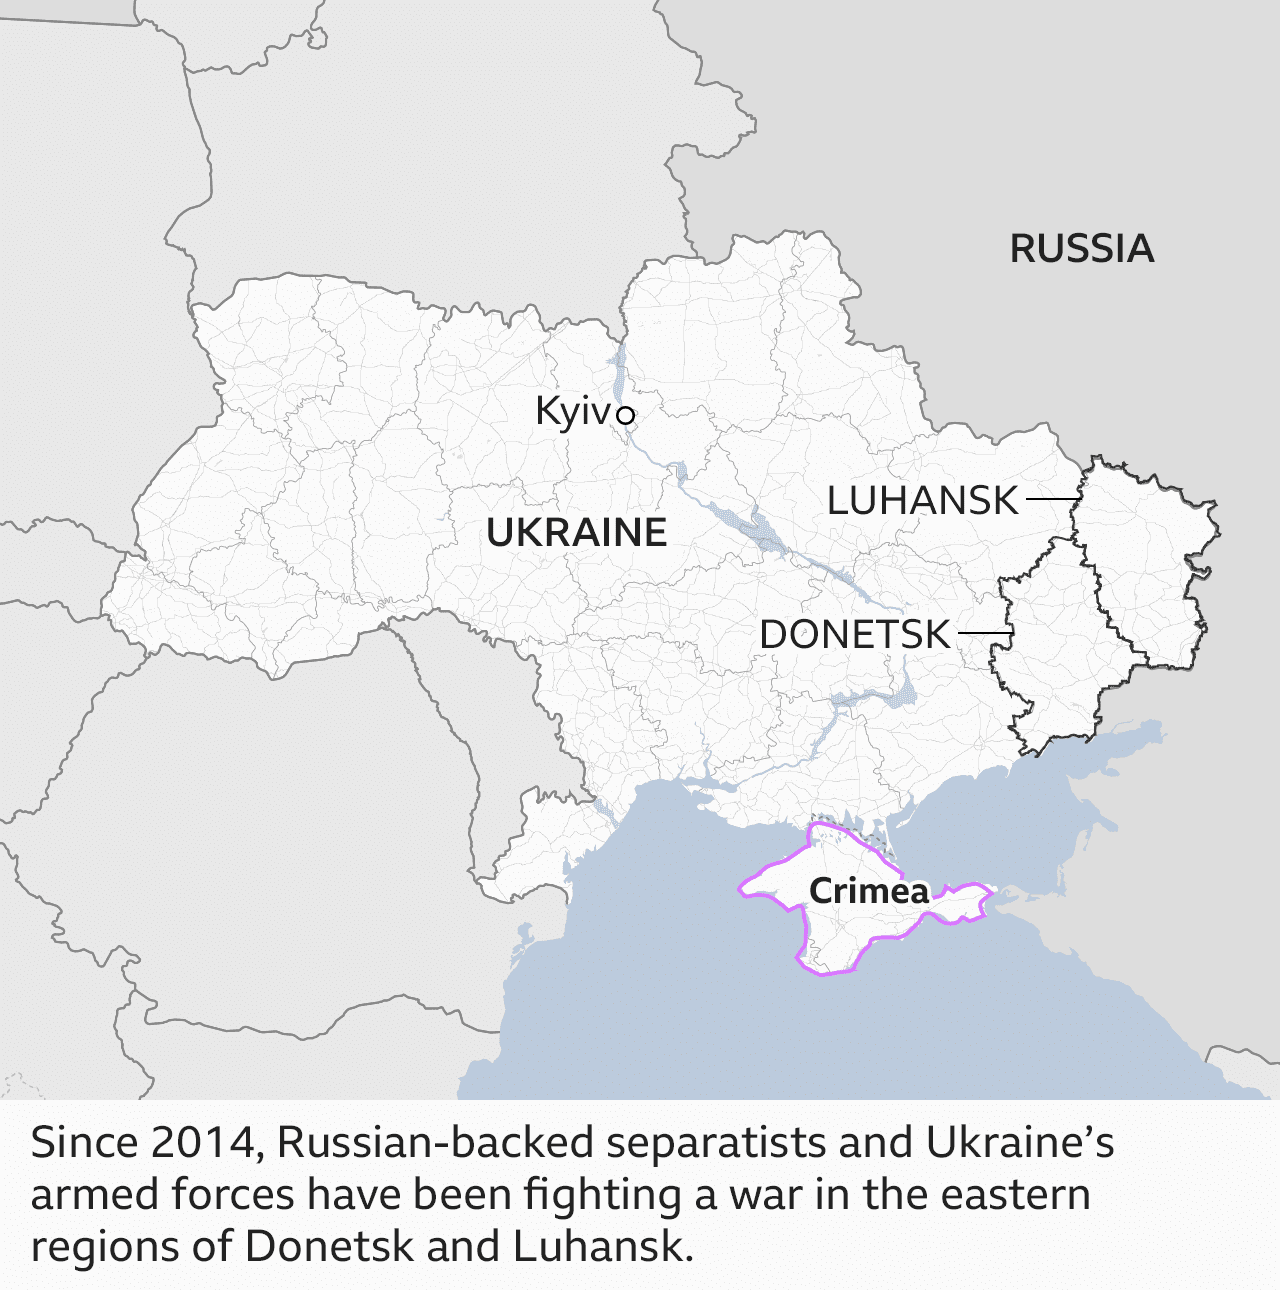 Since 2014, Russian-backed separatists and Ukraine’s armed forces have been fighting a war in the eastern regions of Donetsk and Luhansk.